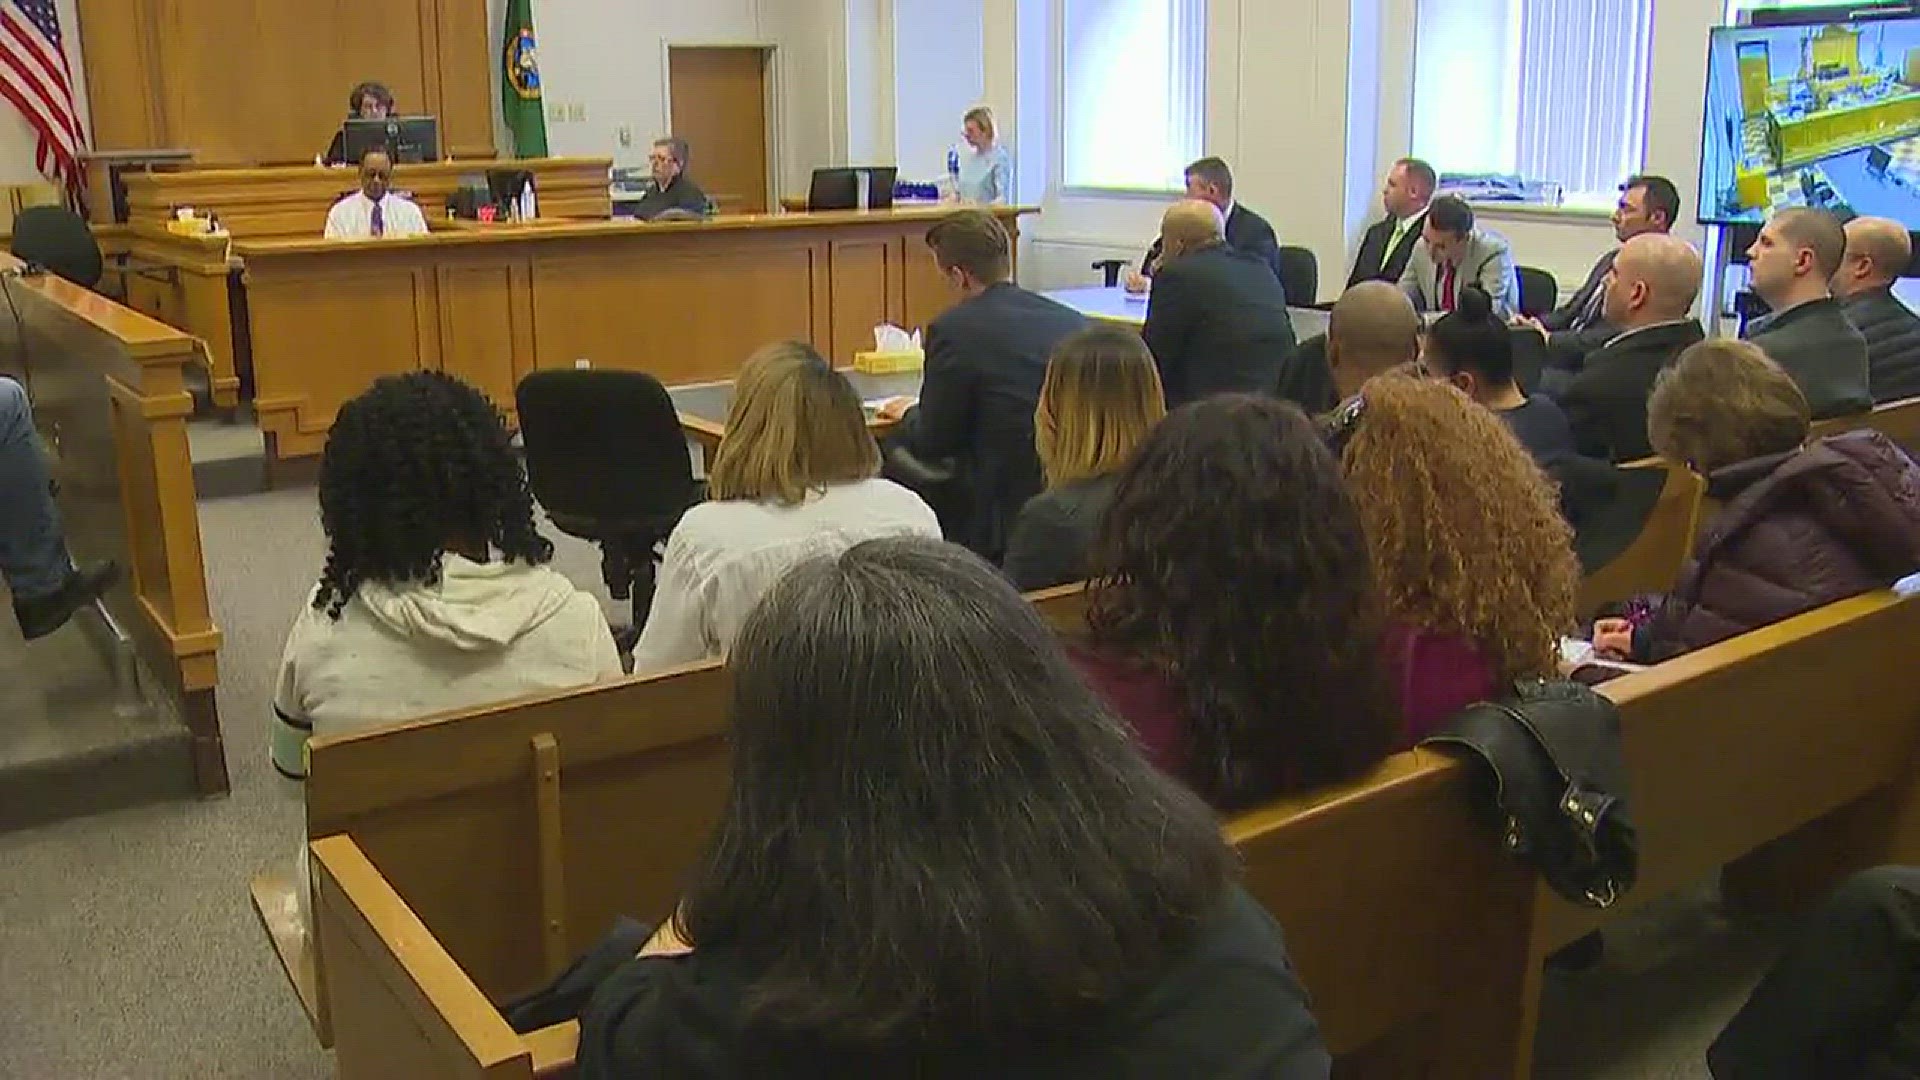 After a day and a half of deliberations, today a jury found that two Seattle Police officers feared for their lives when they shot and killed Che Taylor.